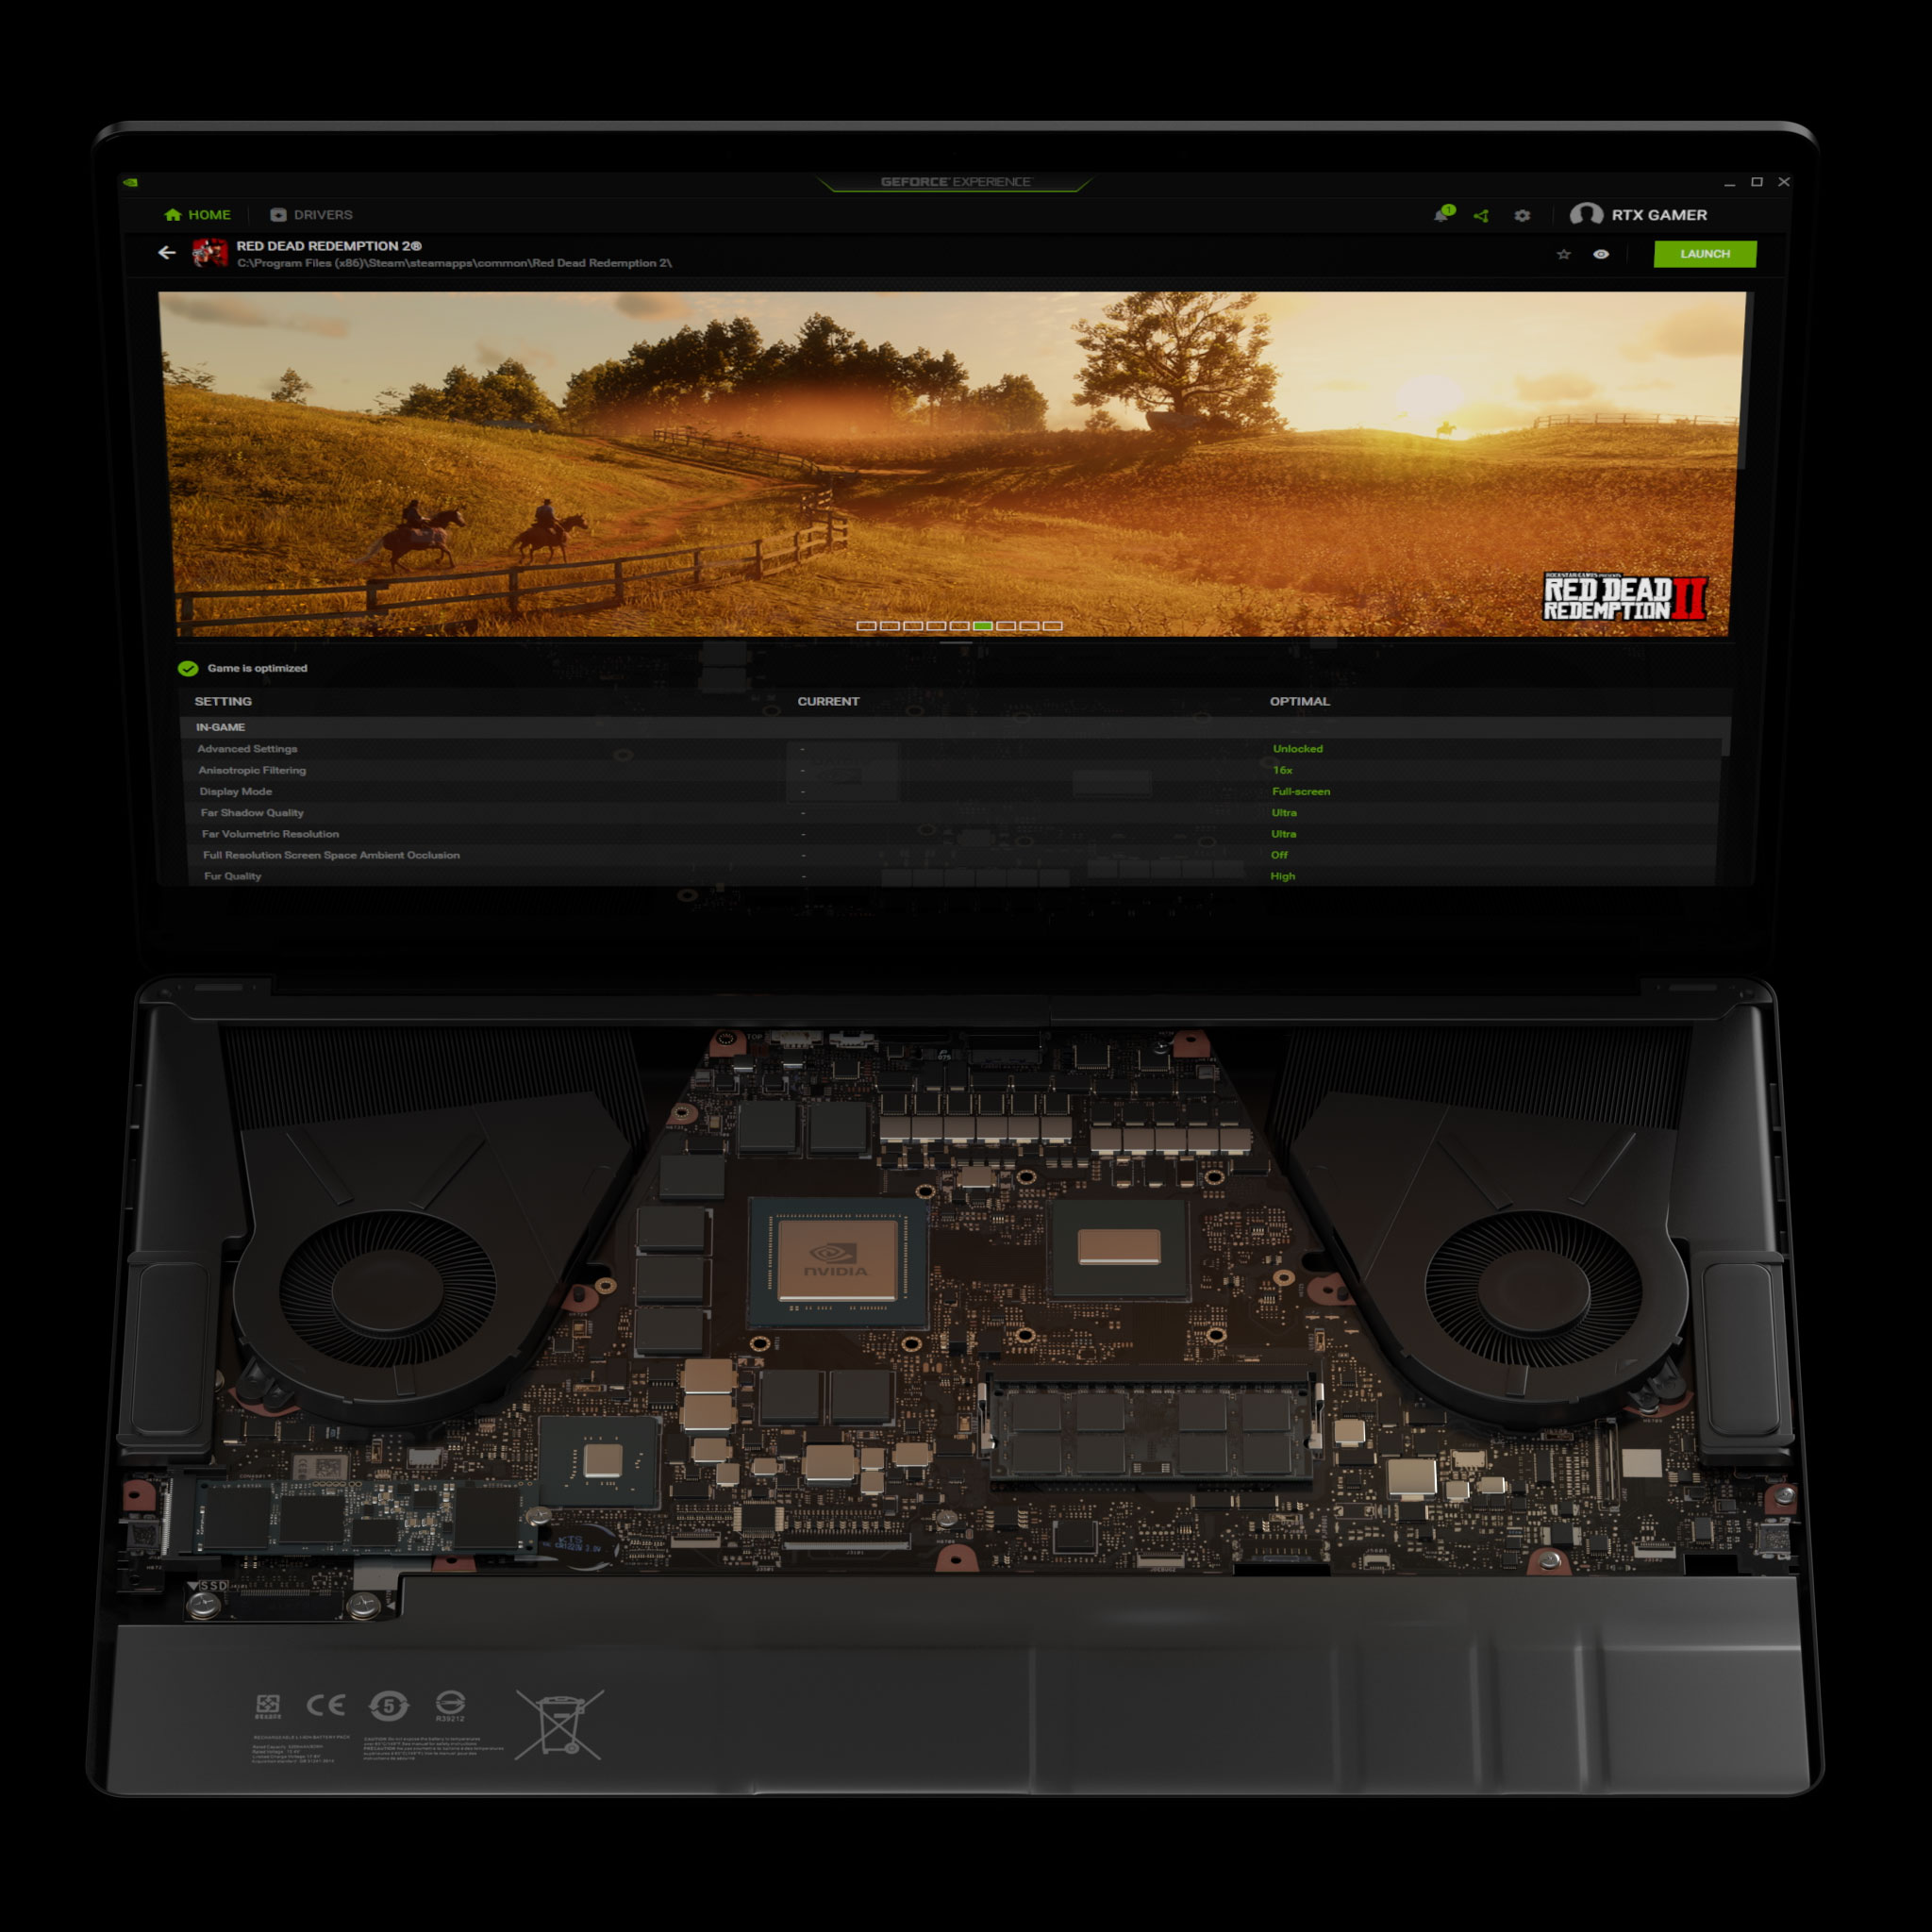 GeForce Laptop with Max-Q optimal playable settings in GeForce Experience for Red Dead Redemption 2